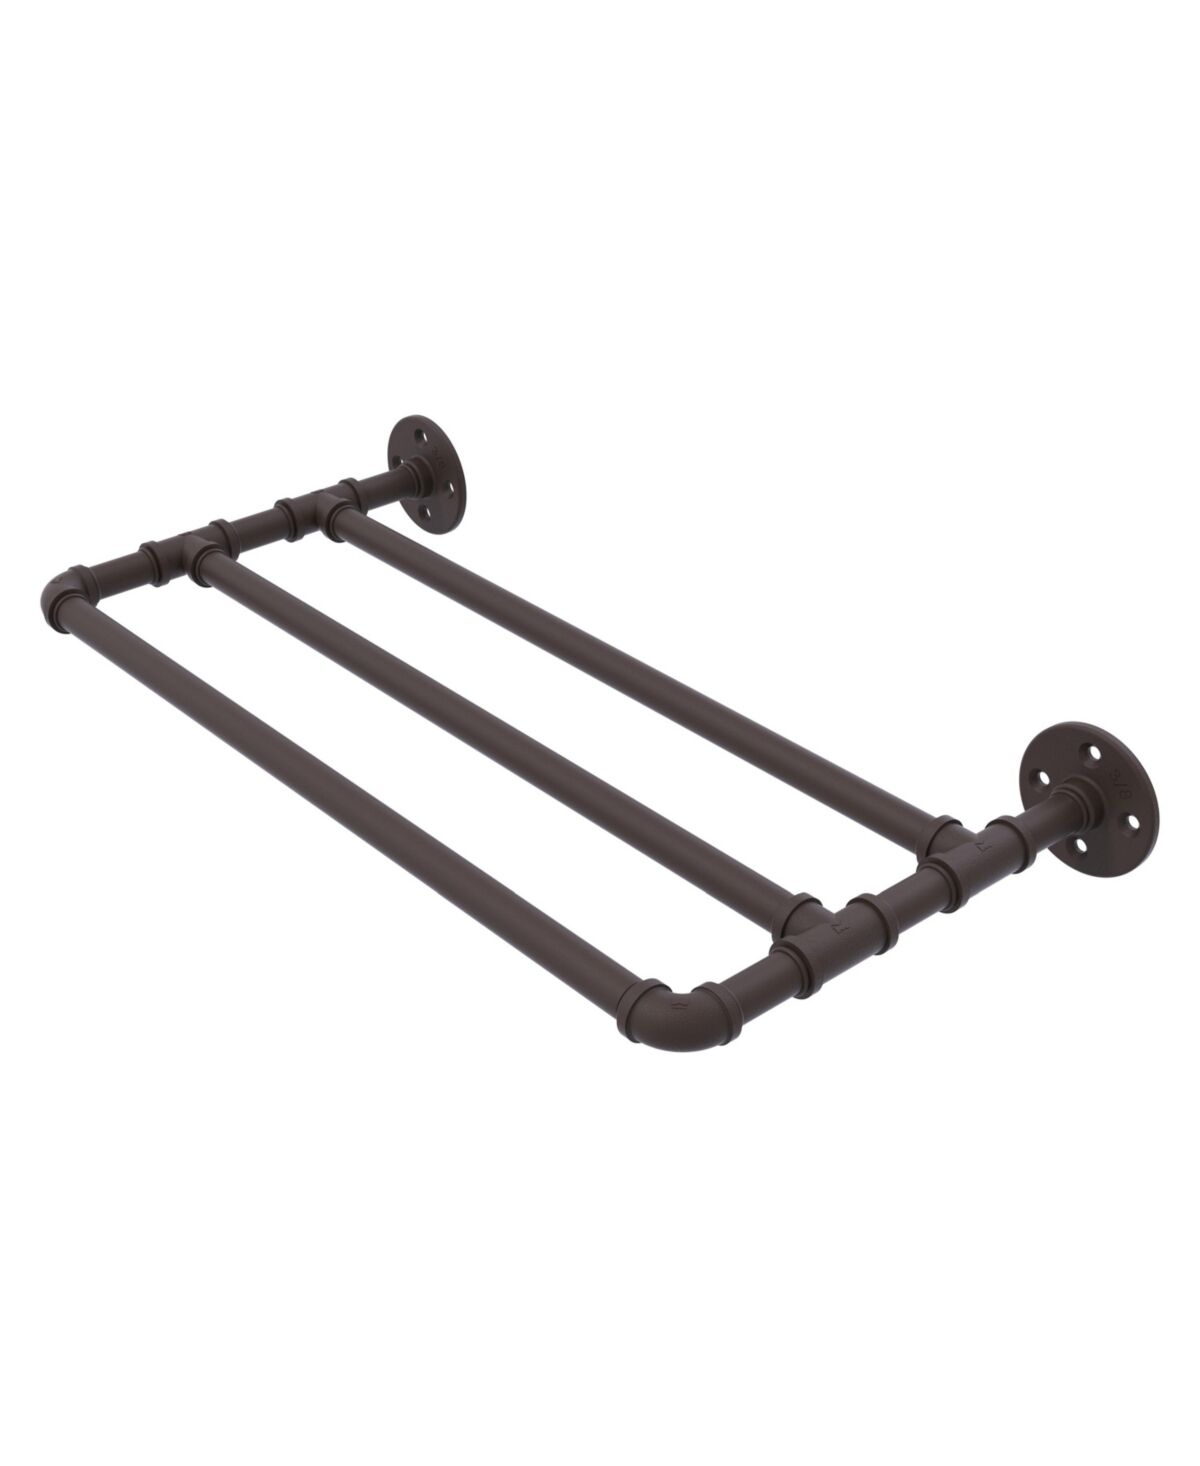 Allied Pipeline Collection 18 Inch Wall Mounted Towel Shelf - Oil rubbed bronze